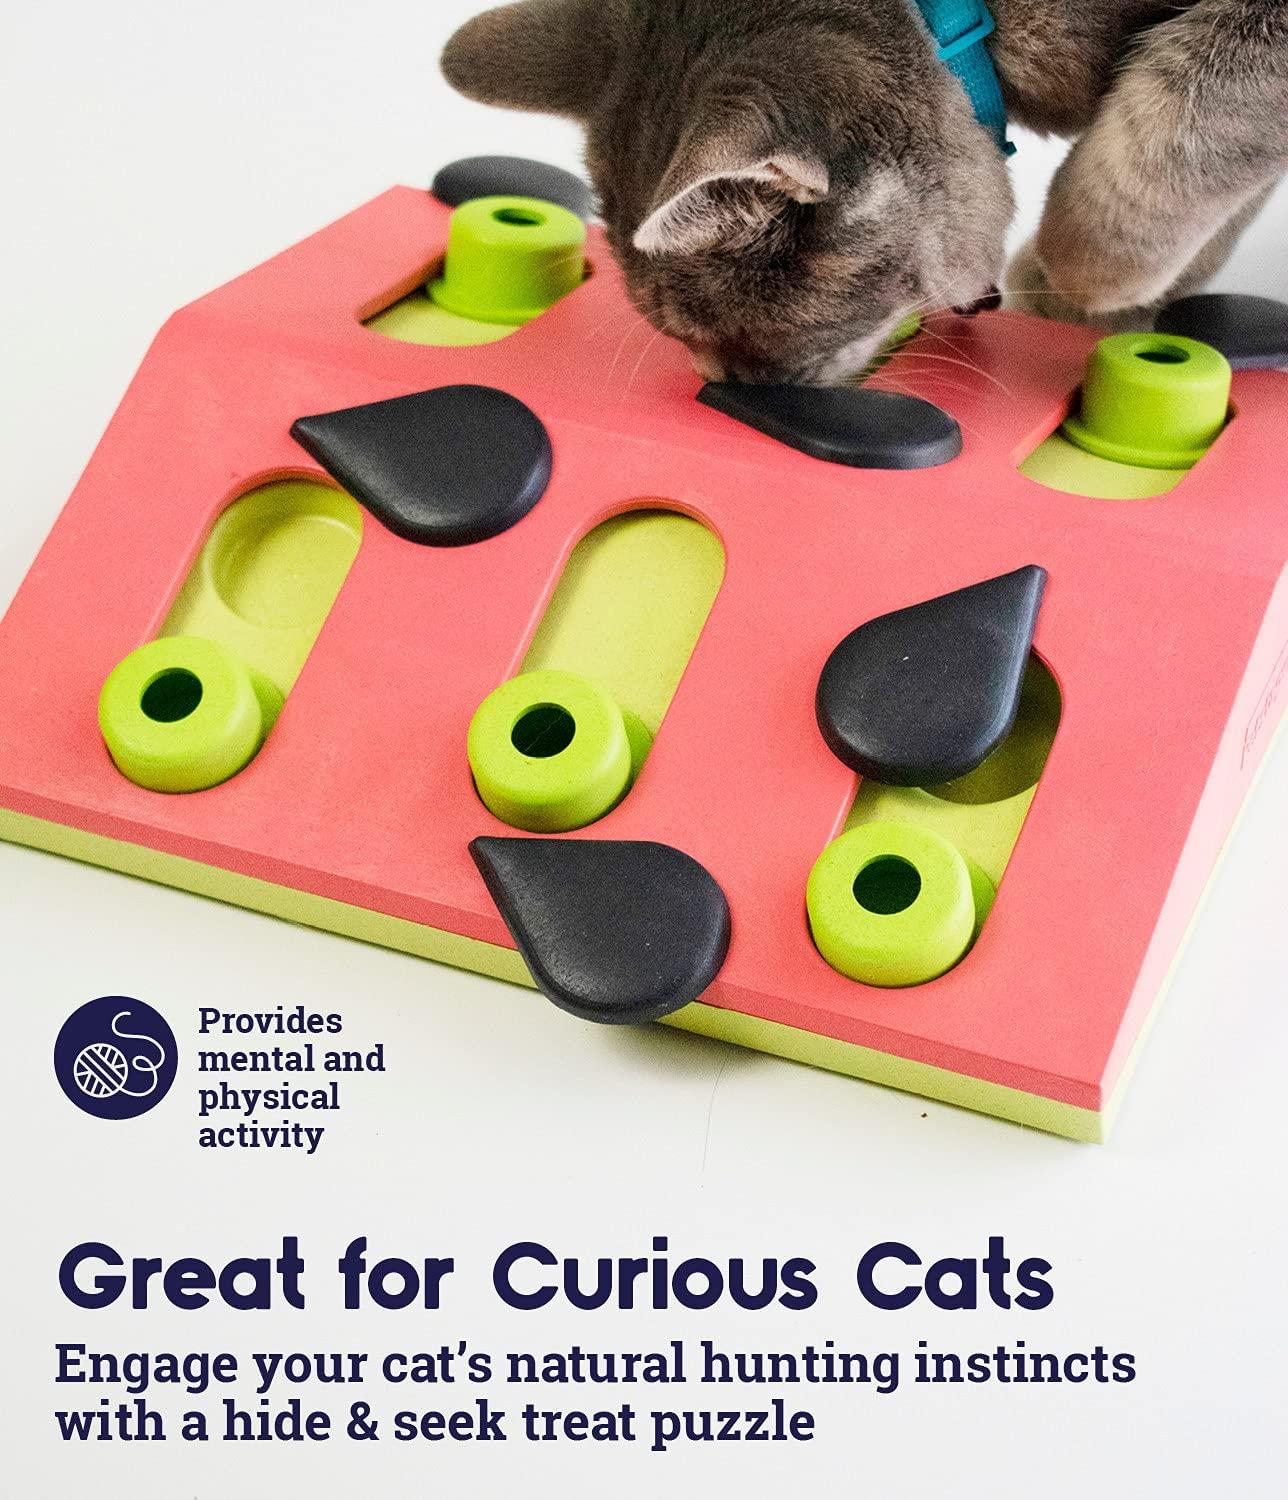 Food puzzles for cats: Feeding for physical and emotional